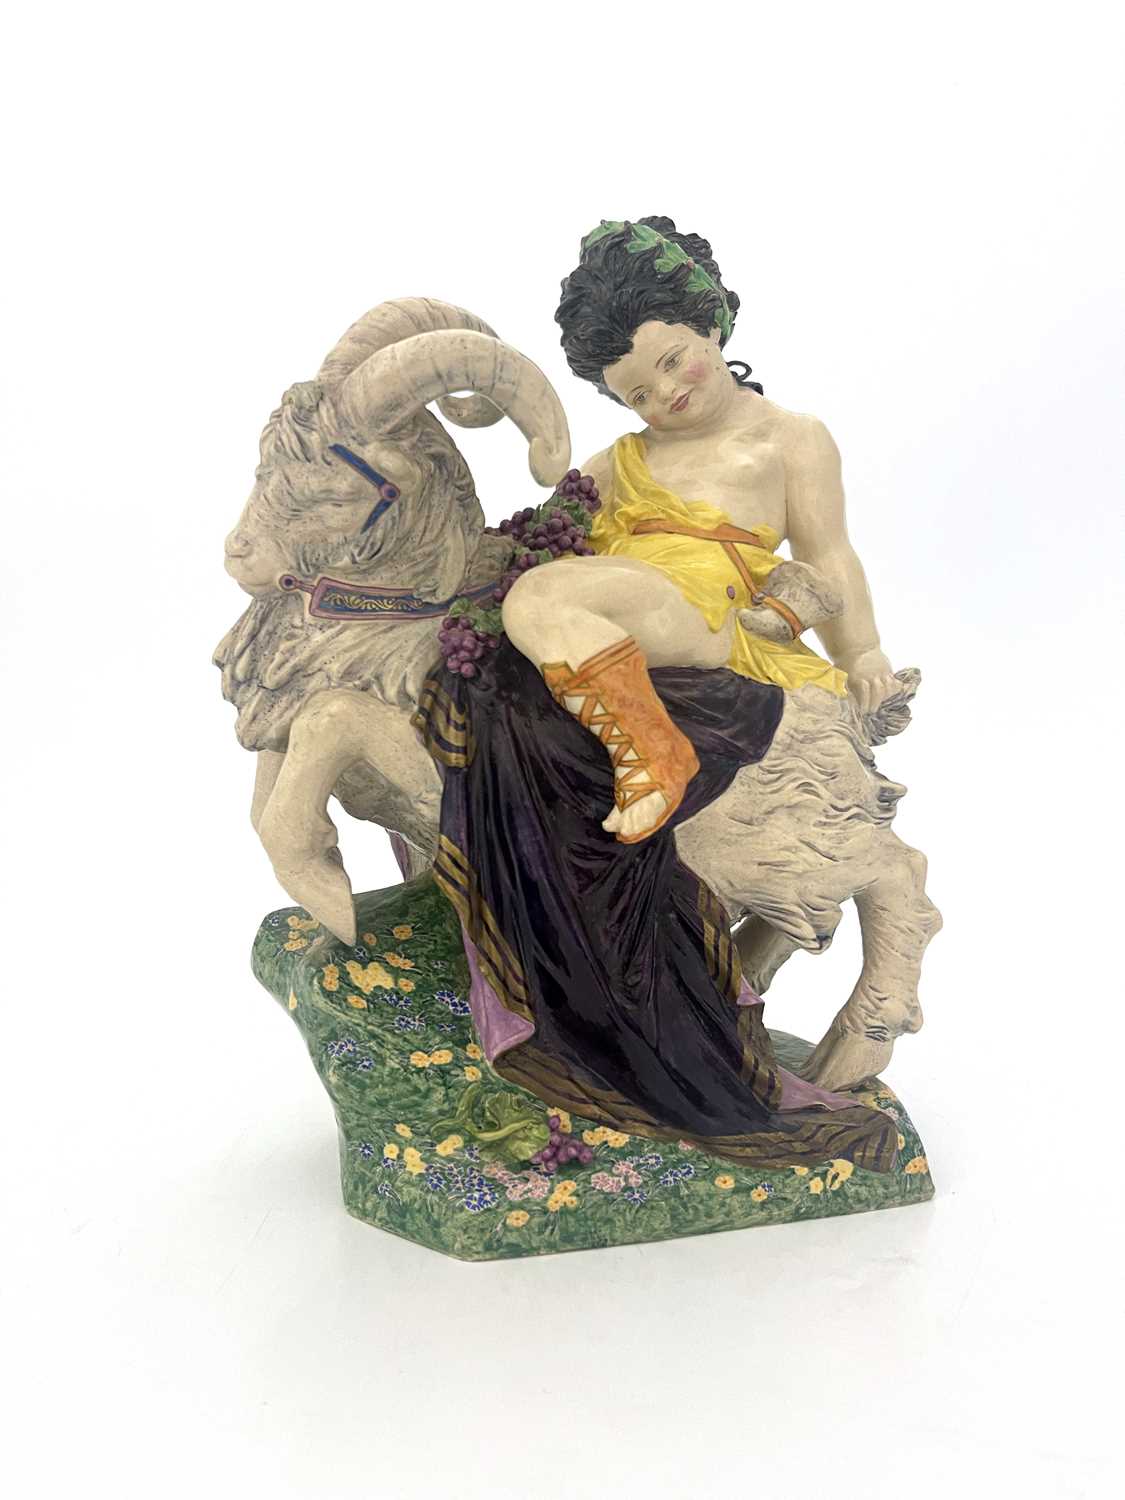 Charles Vyse for Chelsea Pottery, Bacchus on a Goat, 1921, modelled as a Classical boy on a - Image 4 of 9